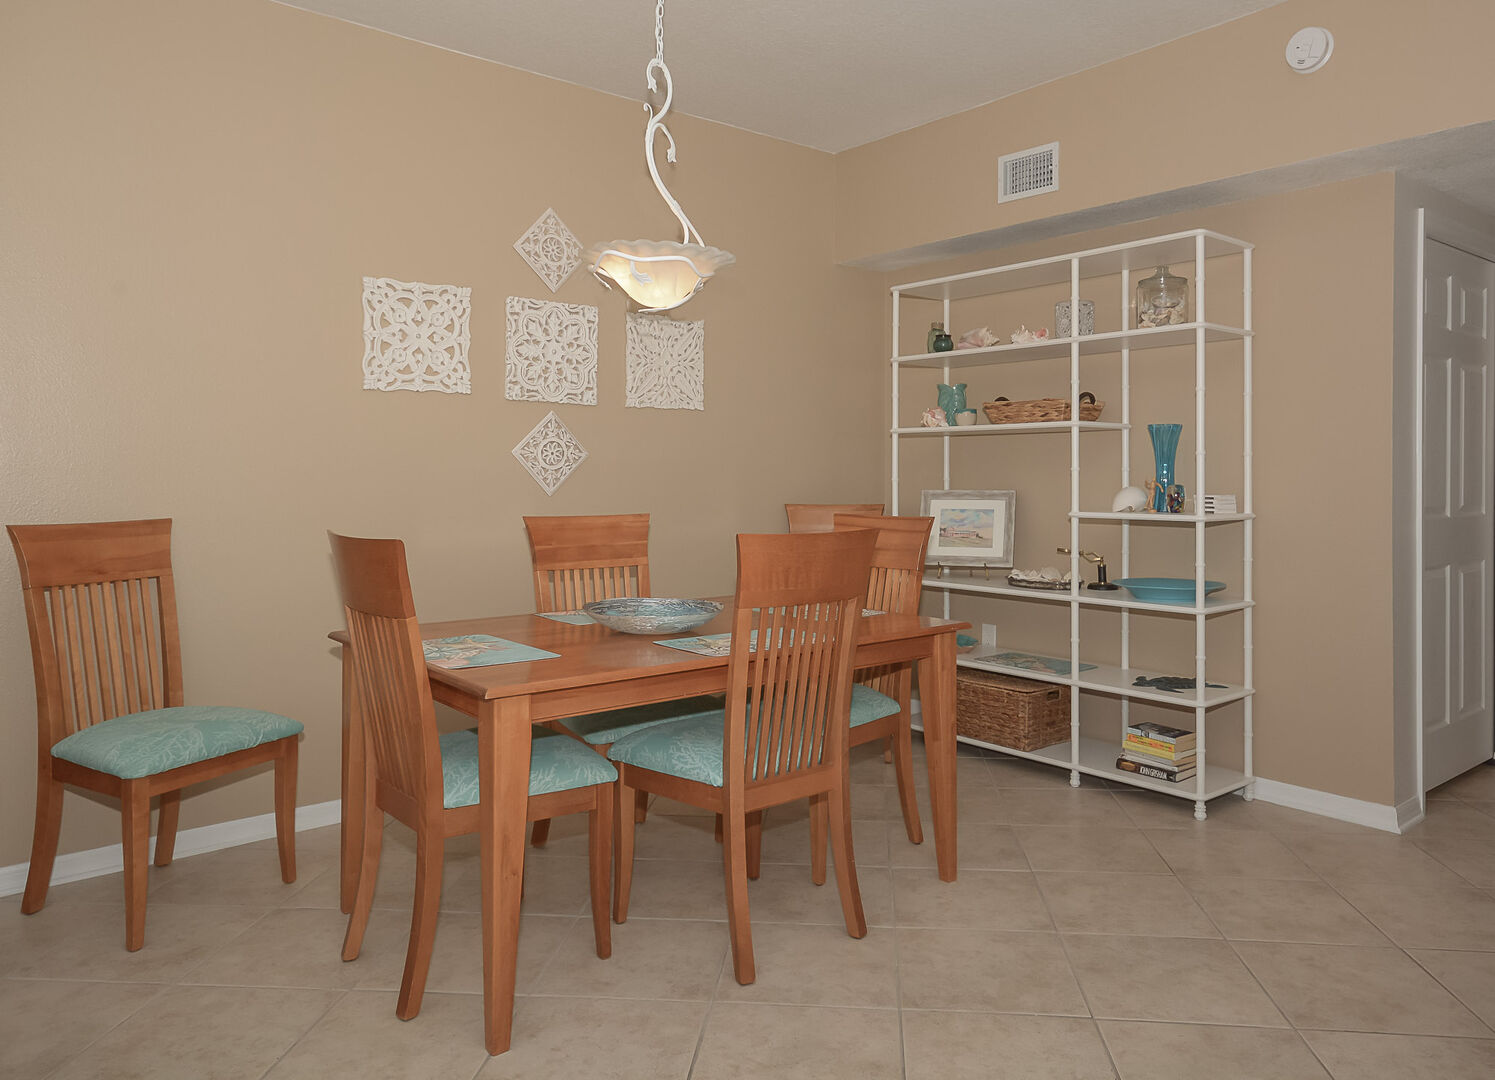 Kitchen table seating 4